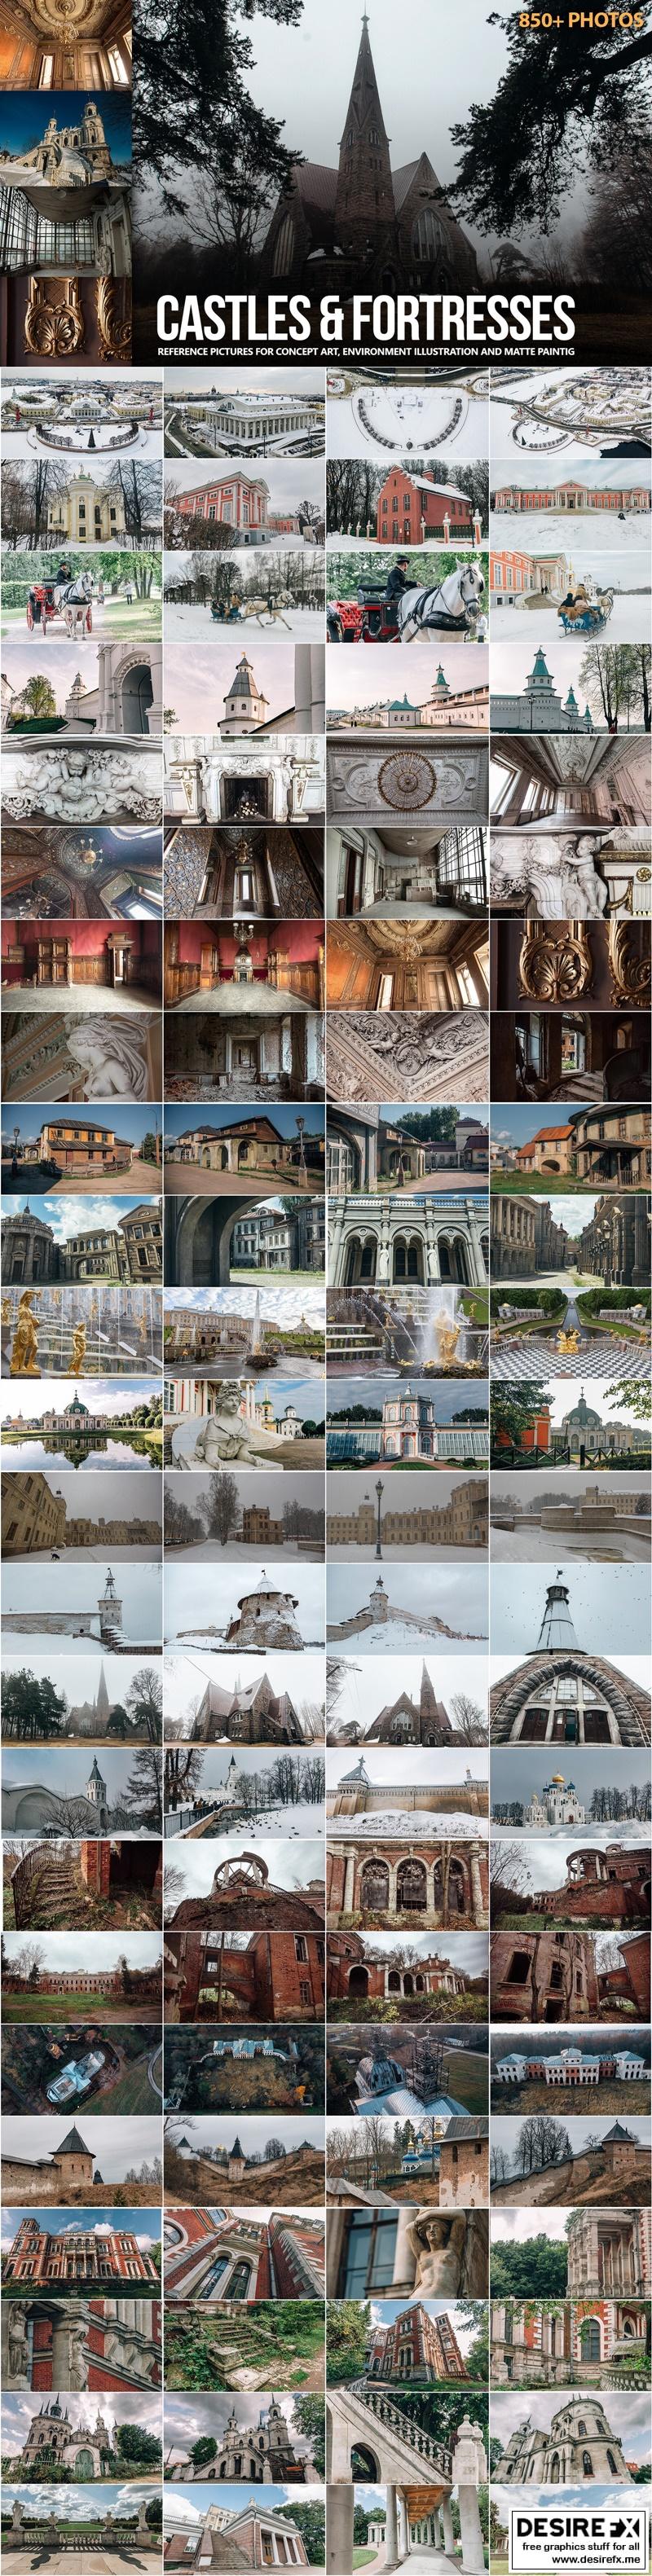 ArtStation - 850+ Castles and Fortresses Reference Pictures